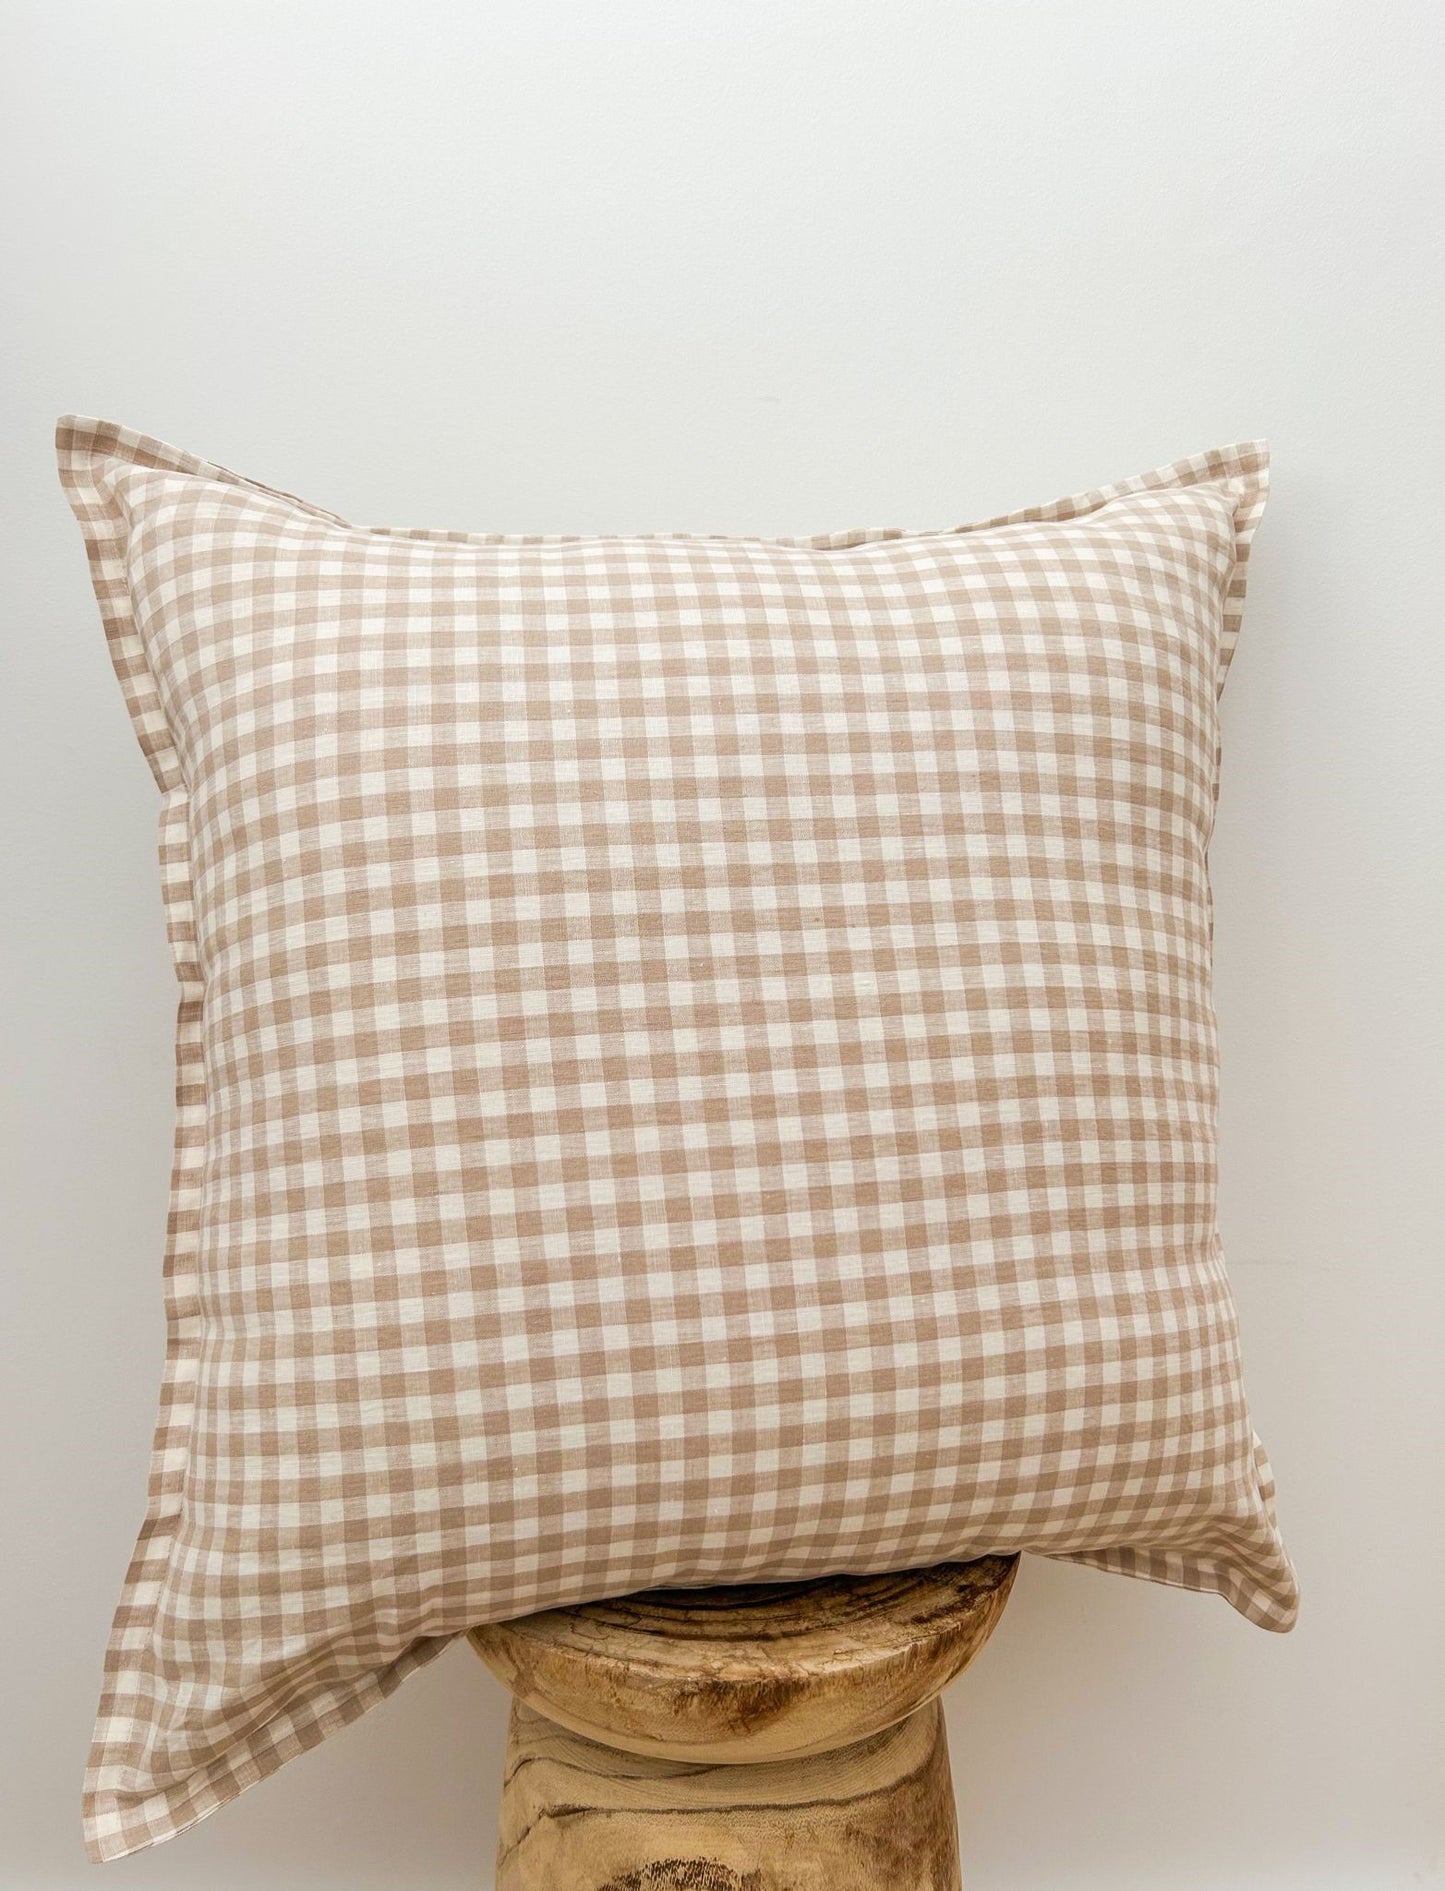 Pure French Linen Euro Cushion - Gingham - 2 for $70